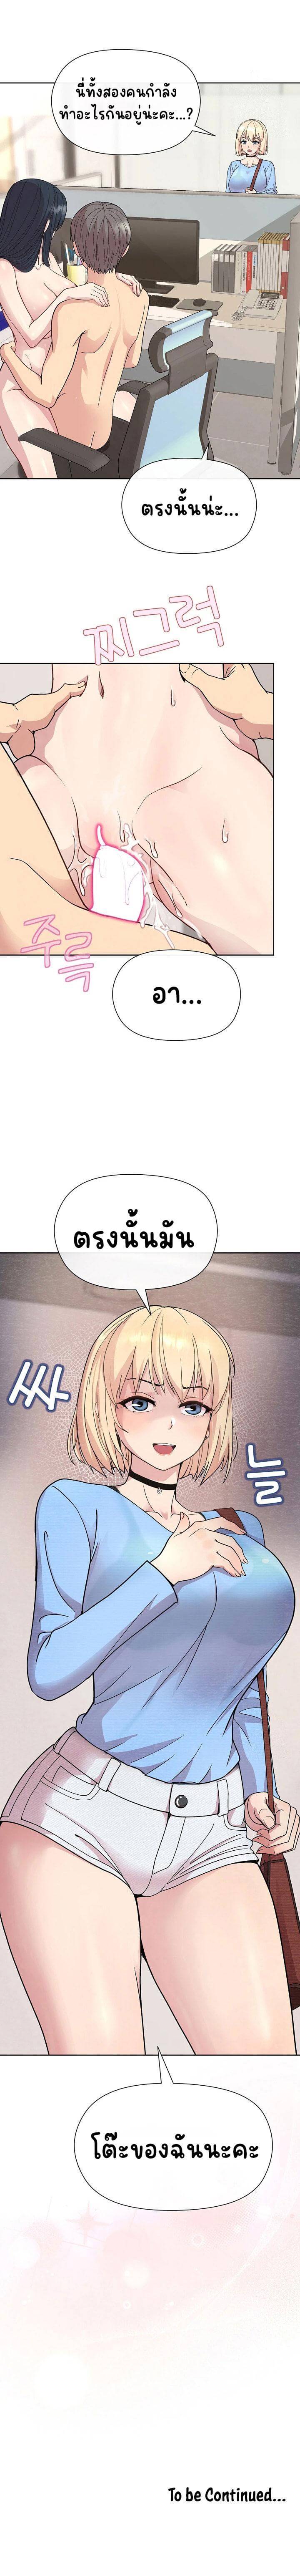 Playing with my manager ตอนที่ 7 ภาพ 11